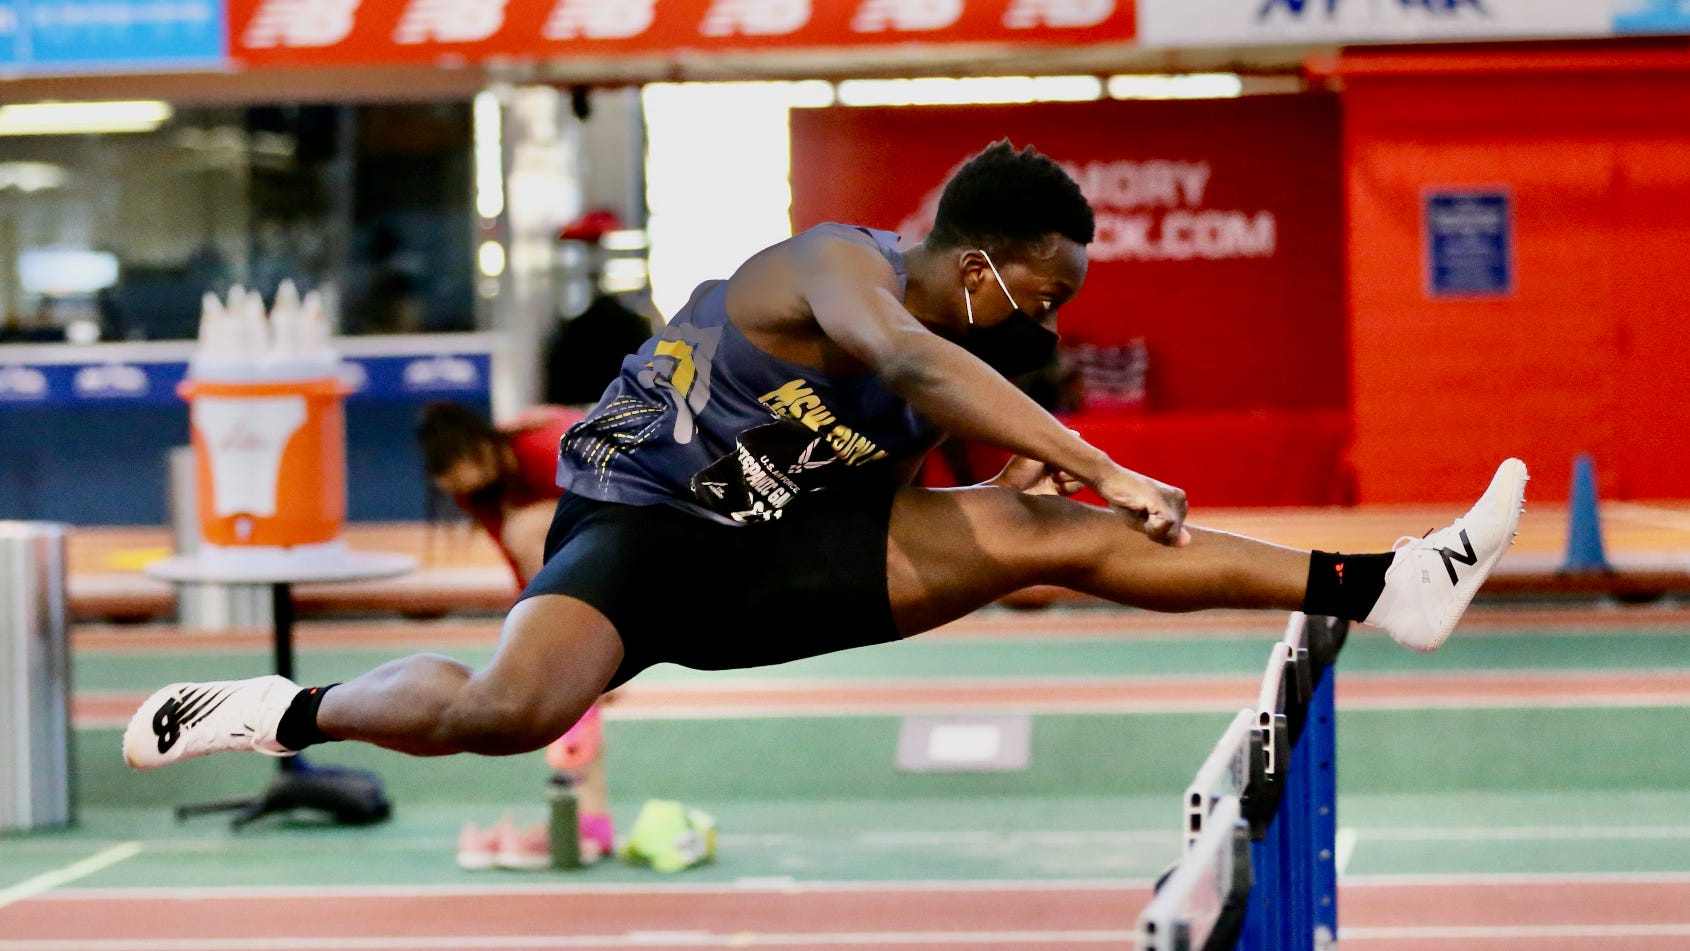 Track and field Hispanic Games meets are smaller amid COVID